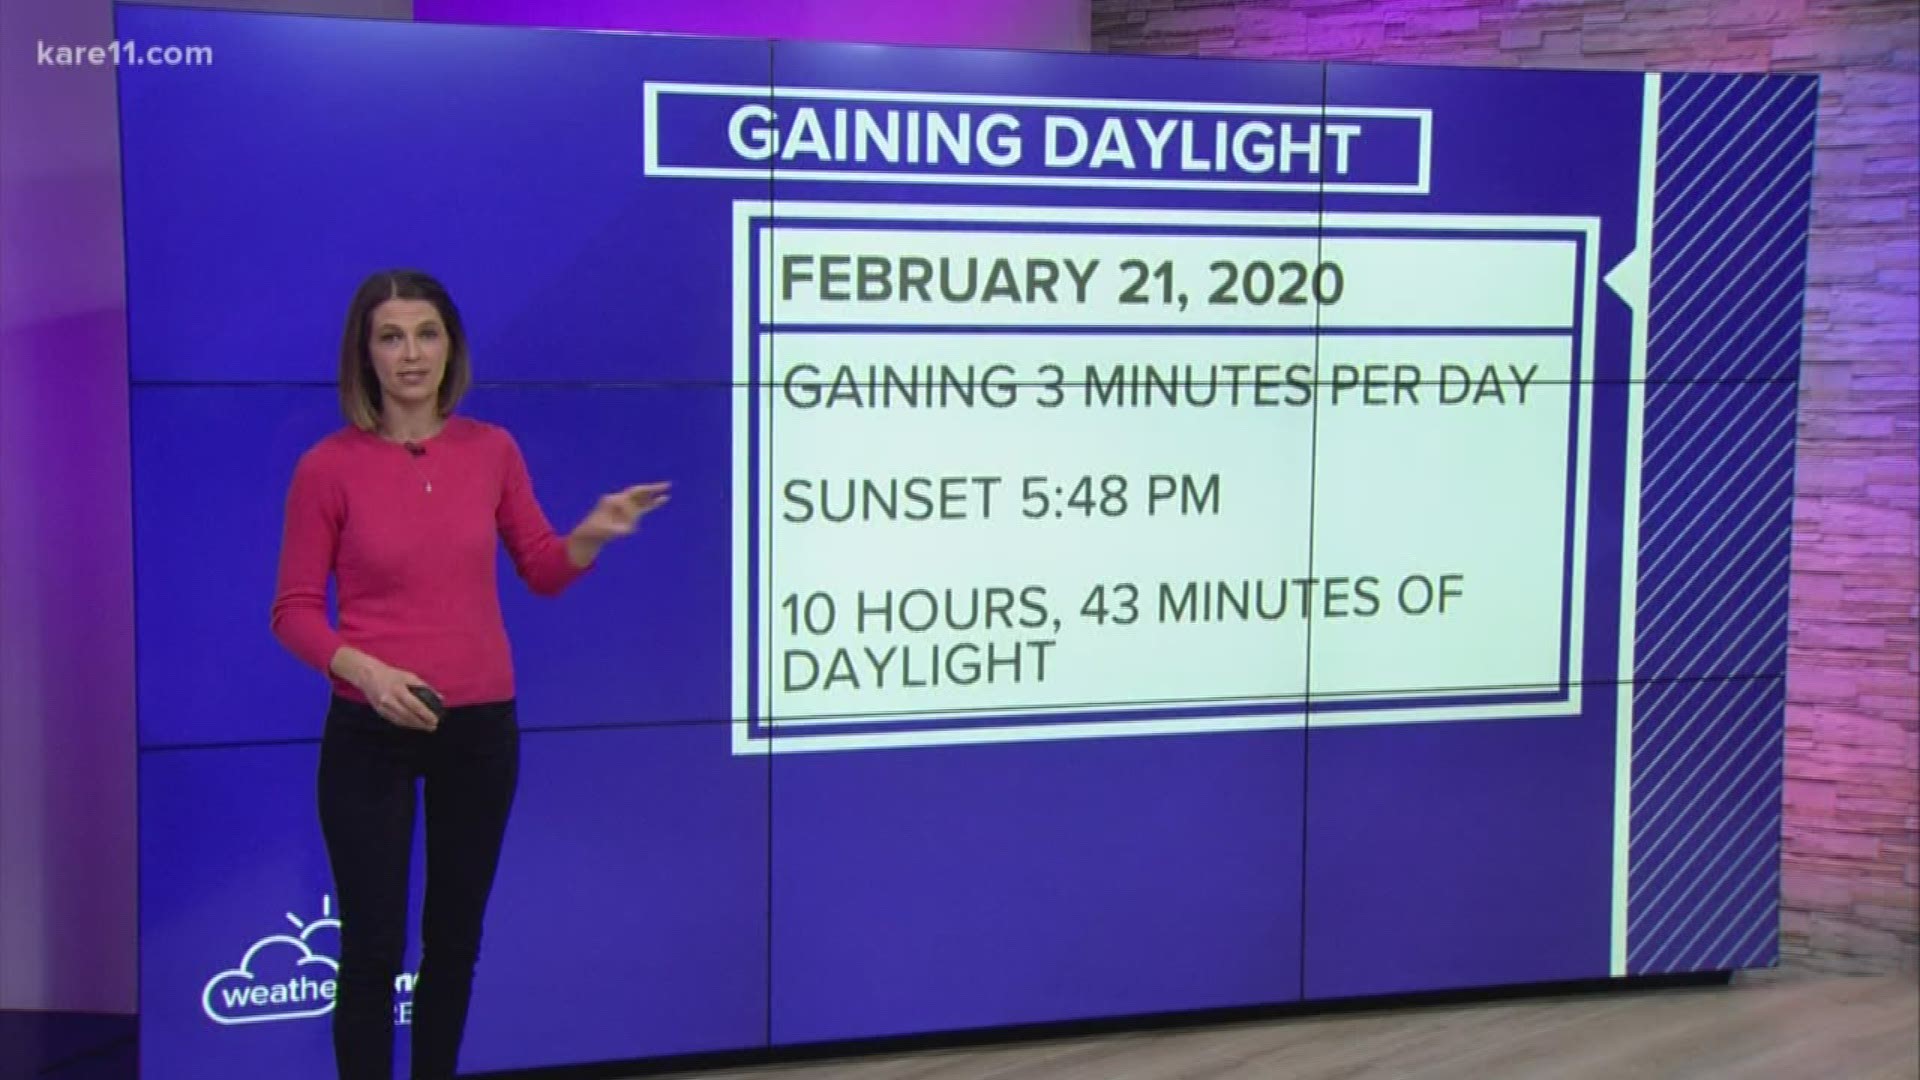 Laura Betker explains just how much daylight we're gaining.